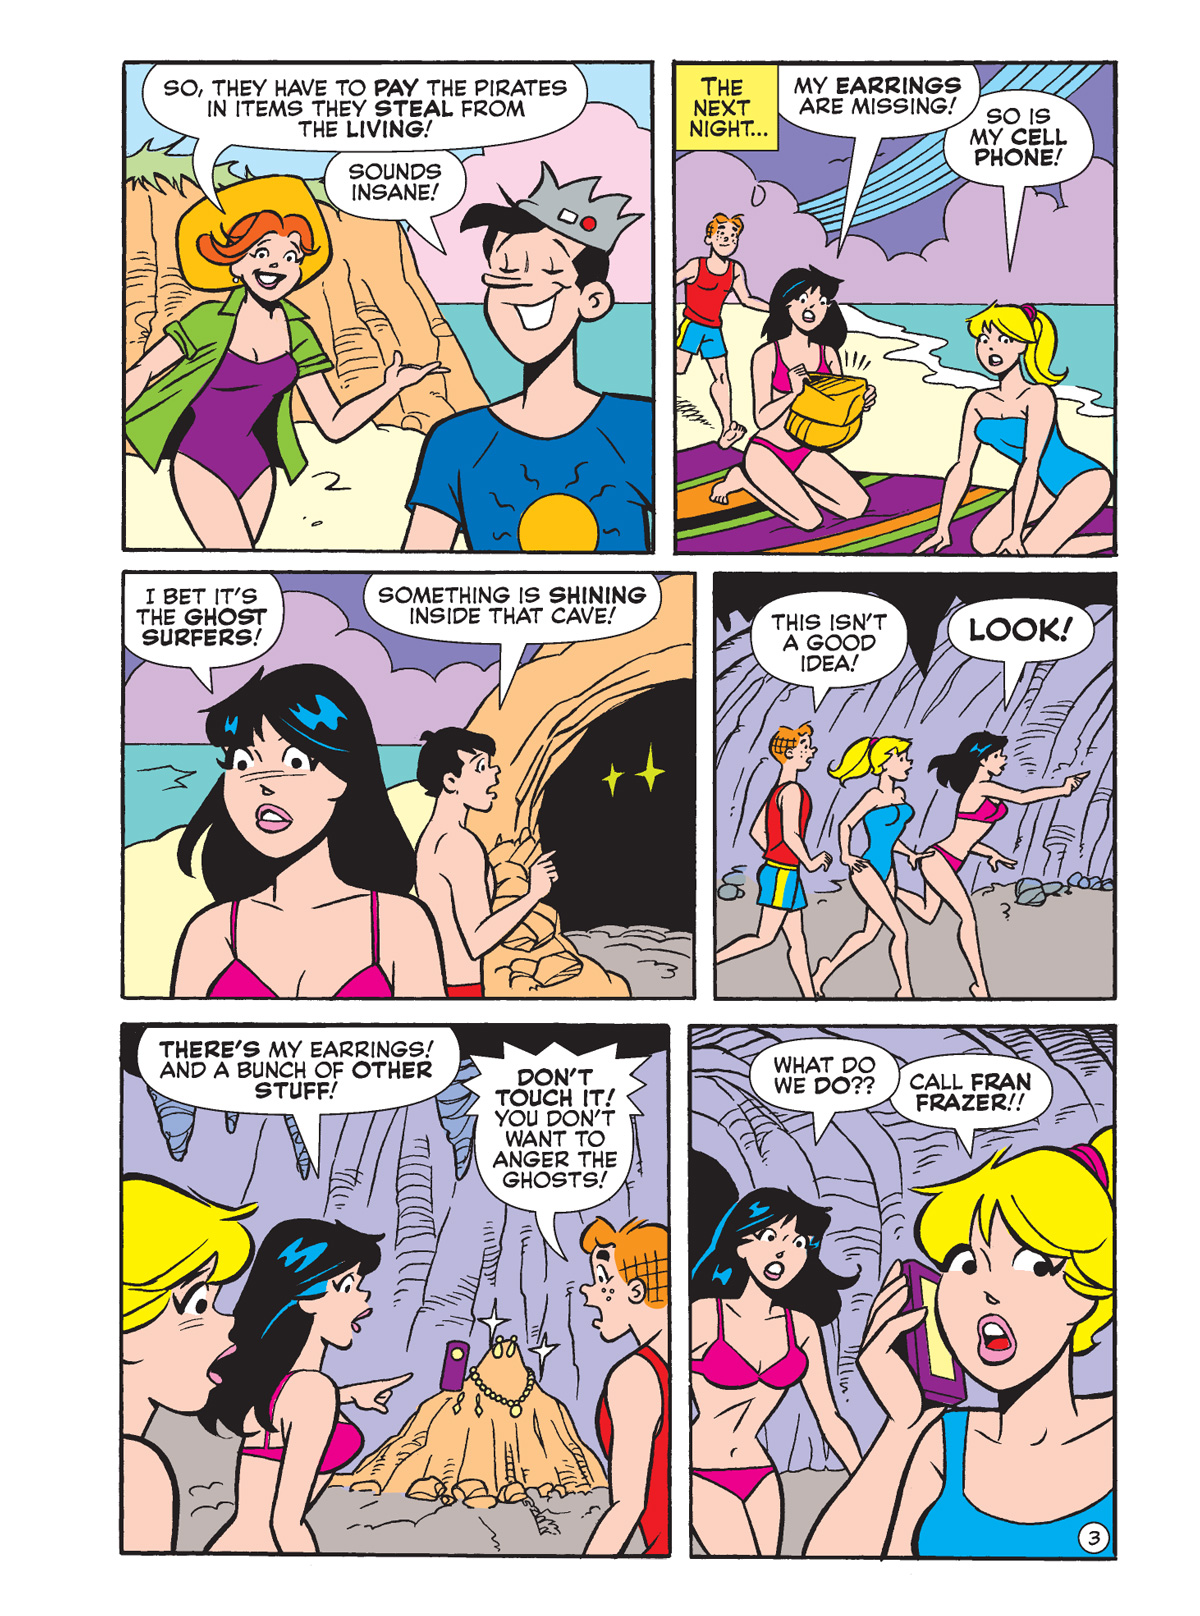 Interior story page from WORLD OF ARCHIE DIGEST #141